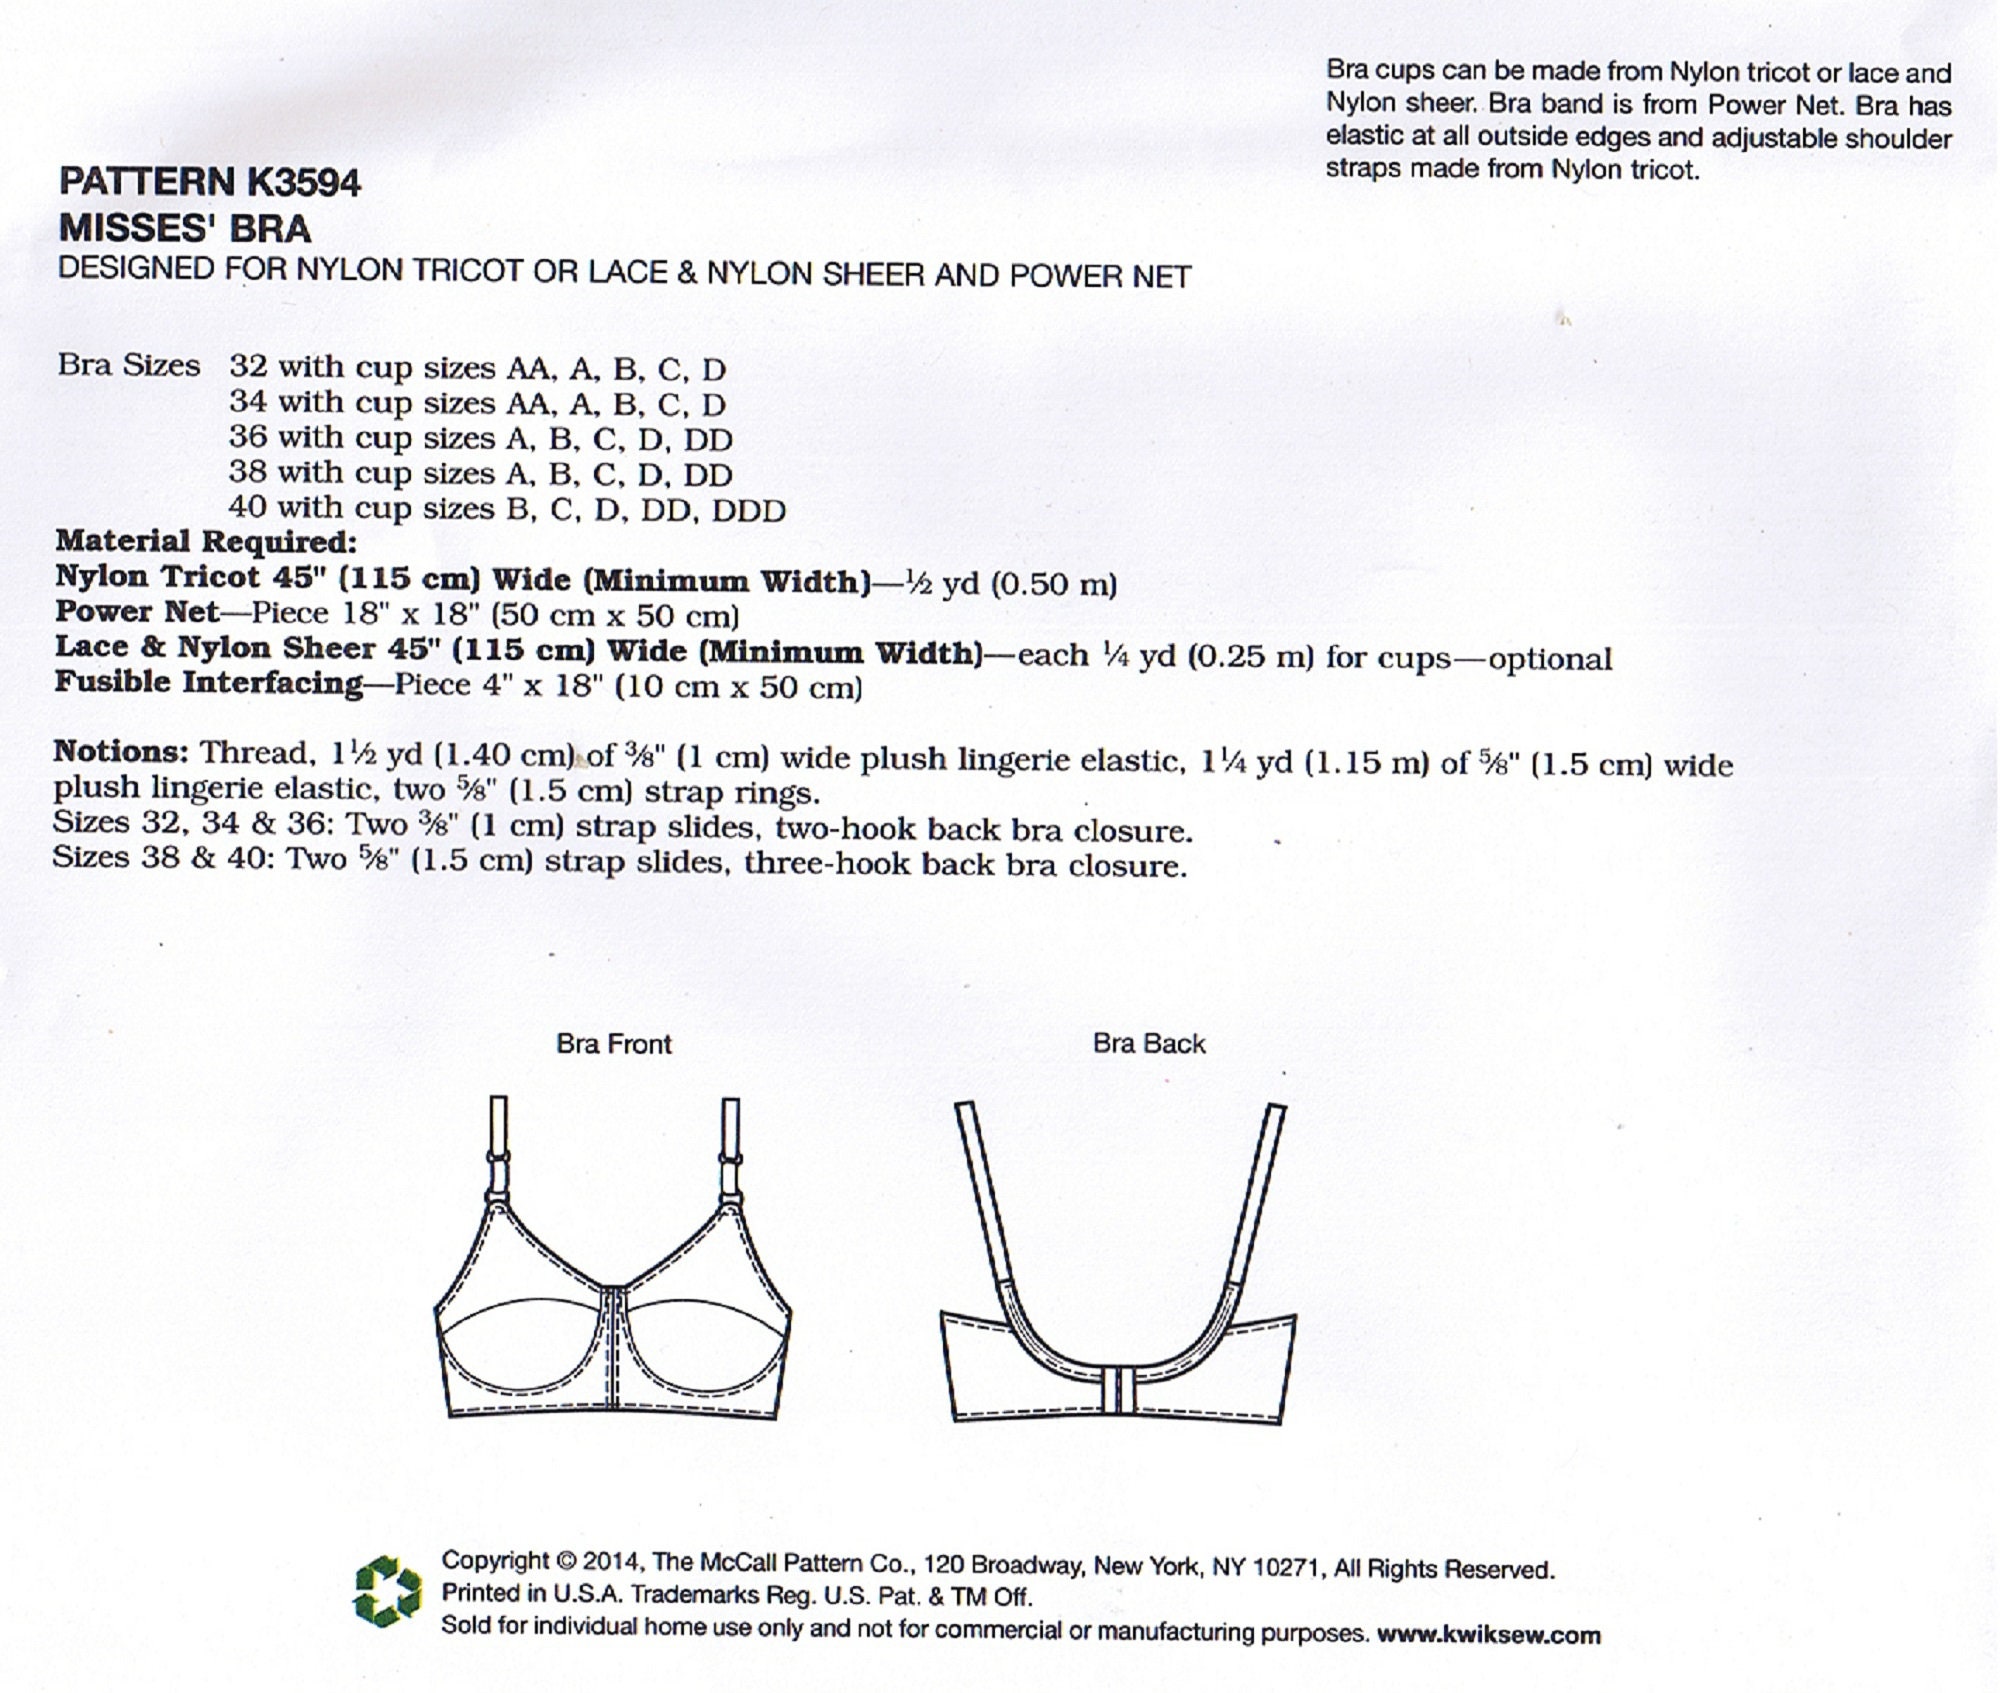 Bra Size 32 34 36 38 40 AA-DDD Cup Sizes With Adjustable Shoulder Straps  Kwik Sew 3594 Sewing Pattern -  Canada